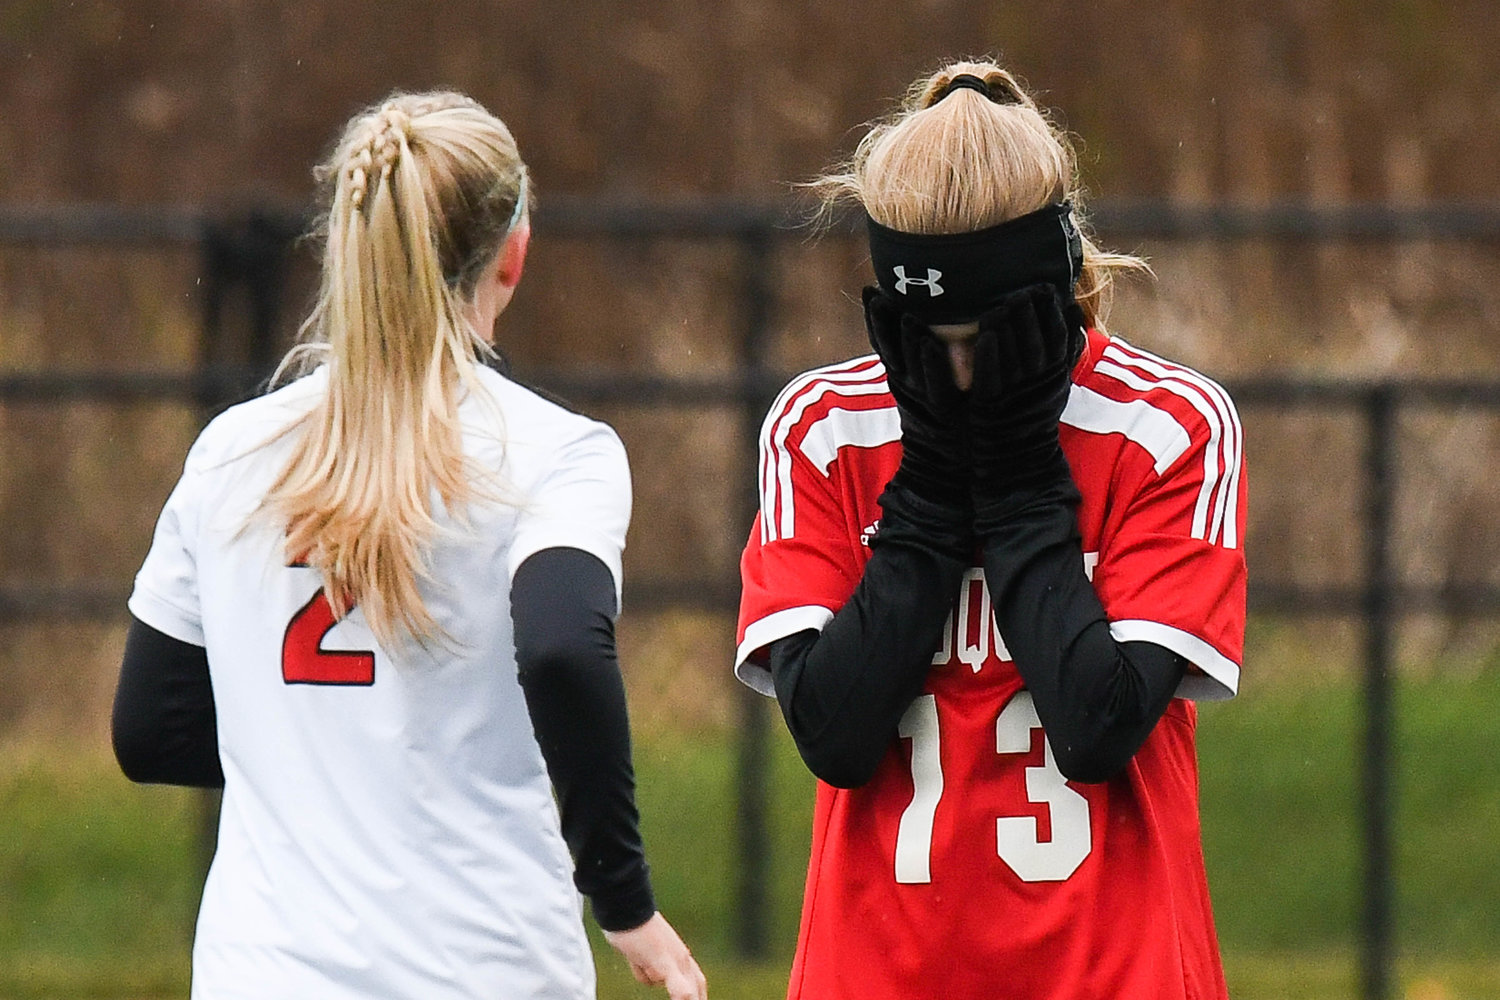 Sauquoit Valley's Kamryn Yerman puts her hands over her face after Section II's Waterford-Halfmoon scored one of the team's six goals in the Class C state final on Sunday at Cortland High School. The Fordians won 6-3, spoiling Sauquoit's quest for the program's first state title.